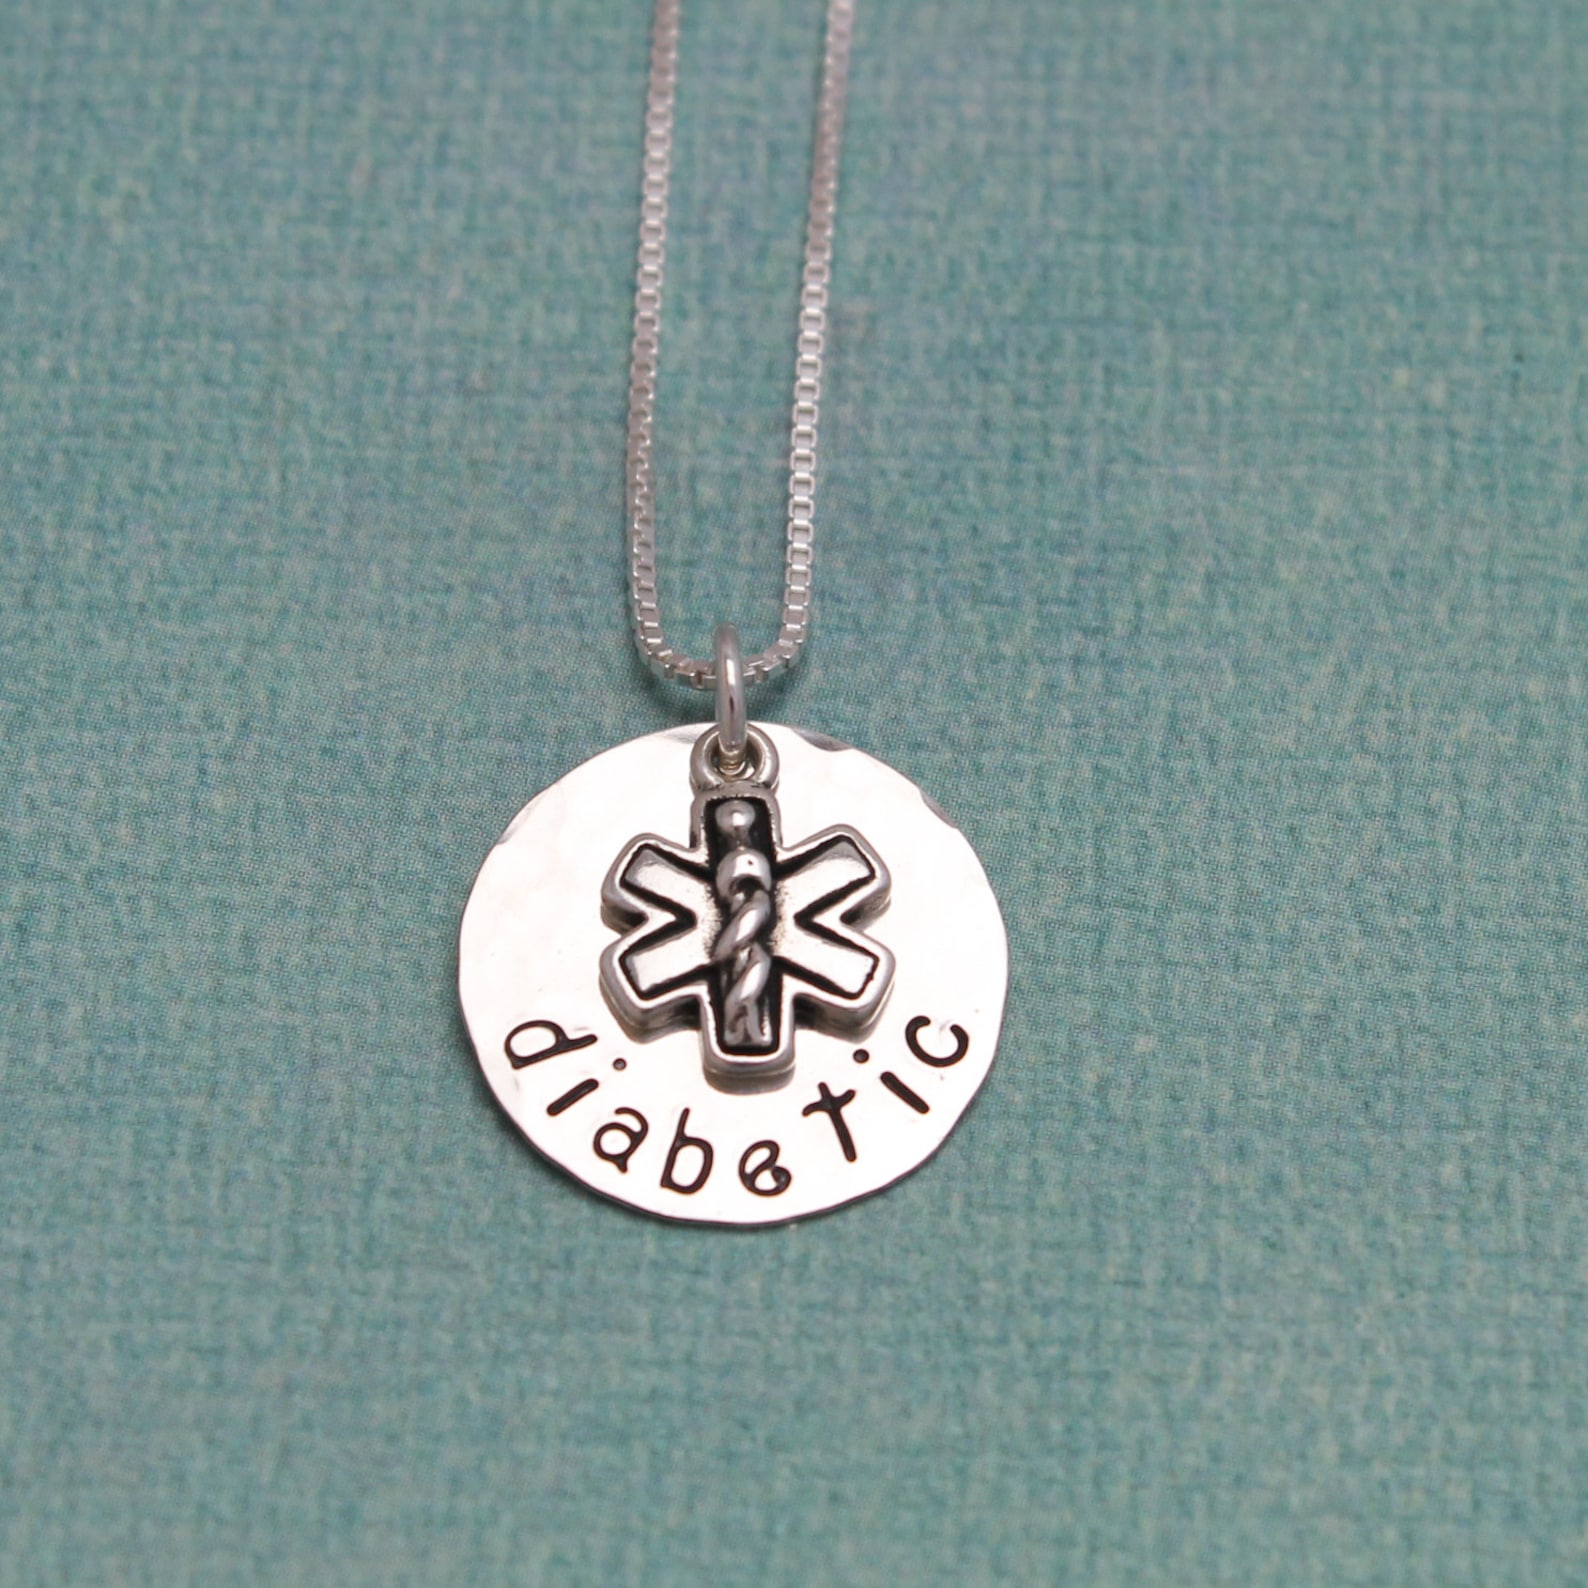 Medical Alert Charm Necklace Sterling Silver Personalized Hand - Etsy